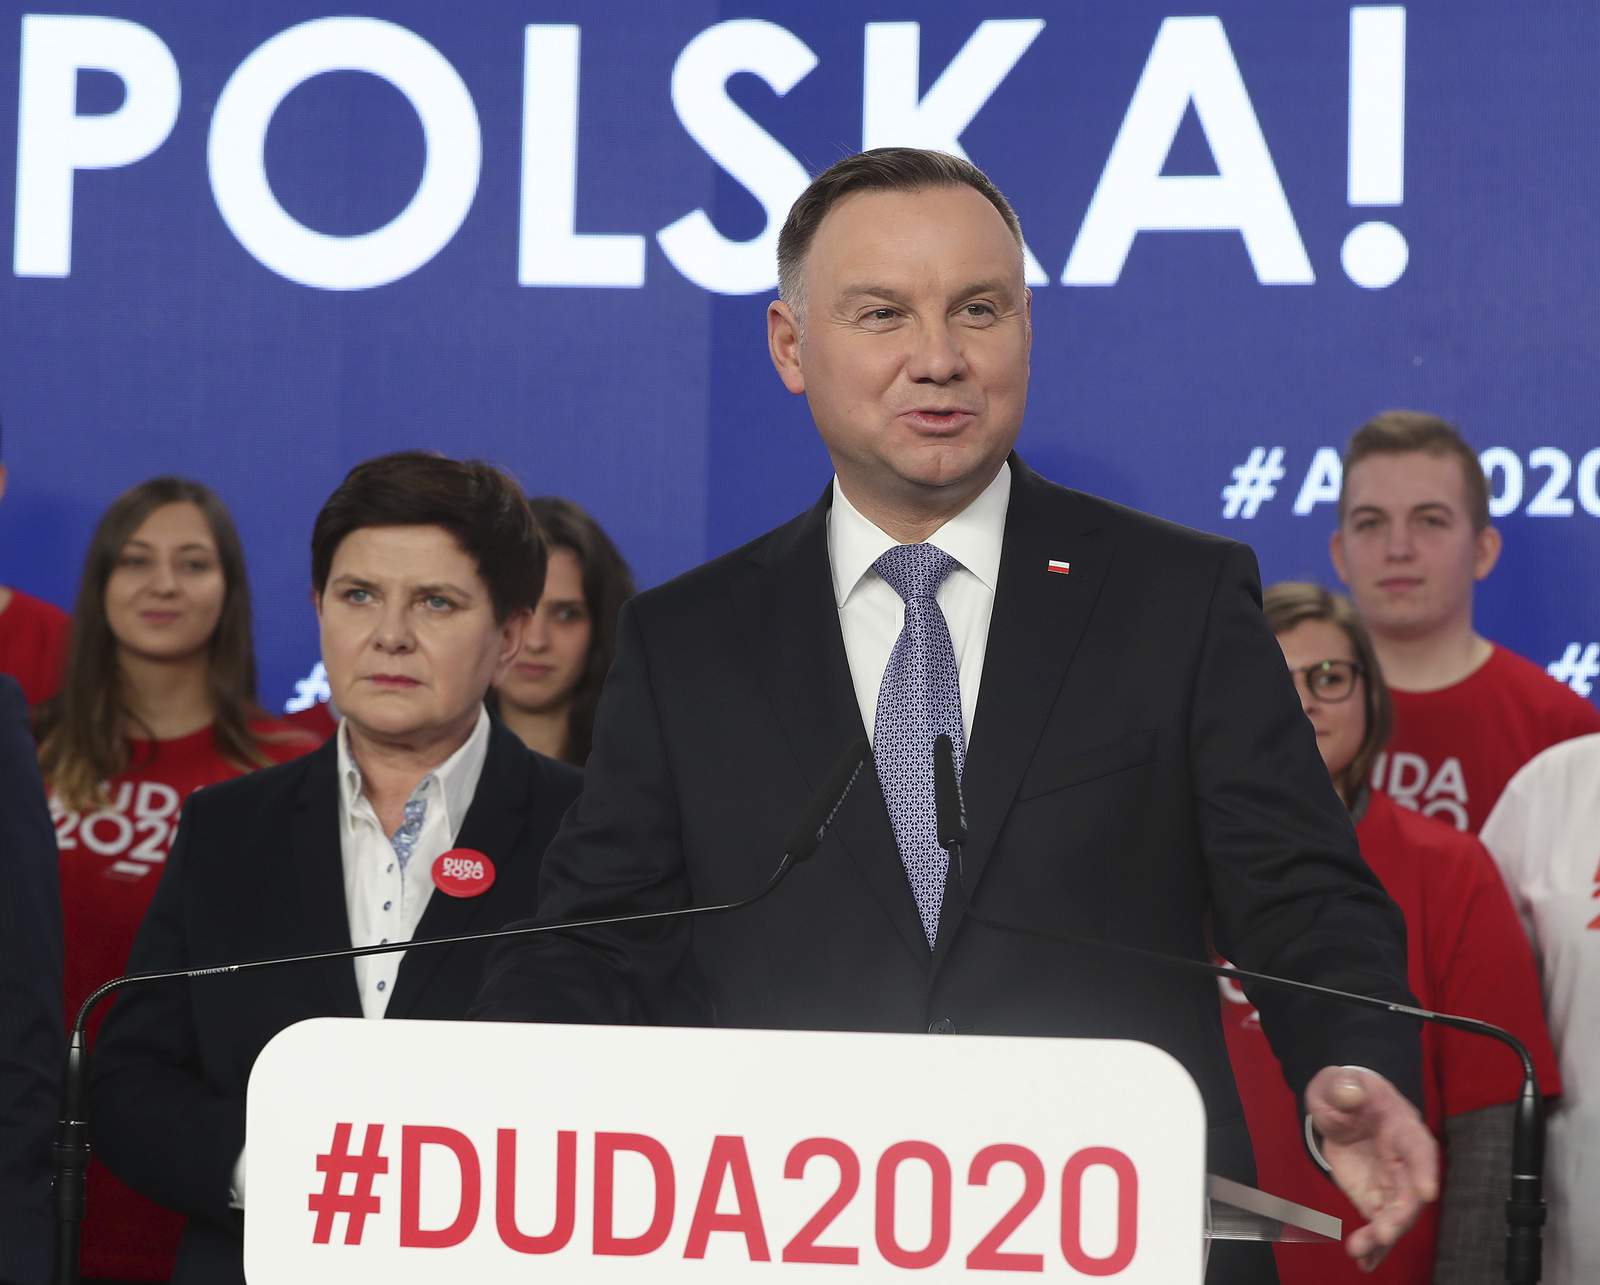 EU official criticizes Polish campaign targeting LGBT people